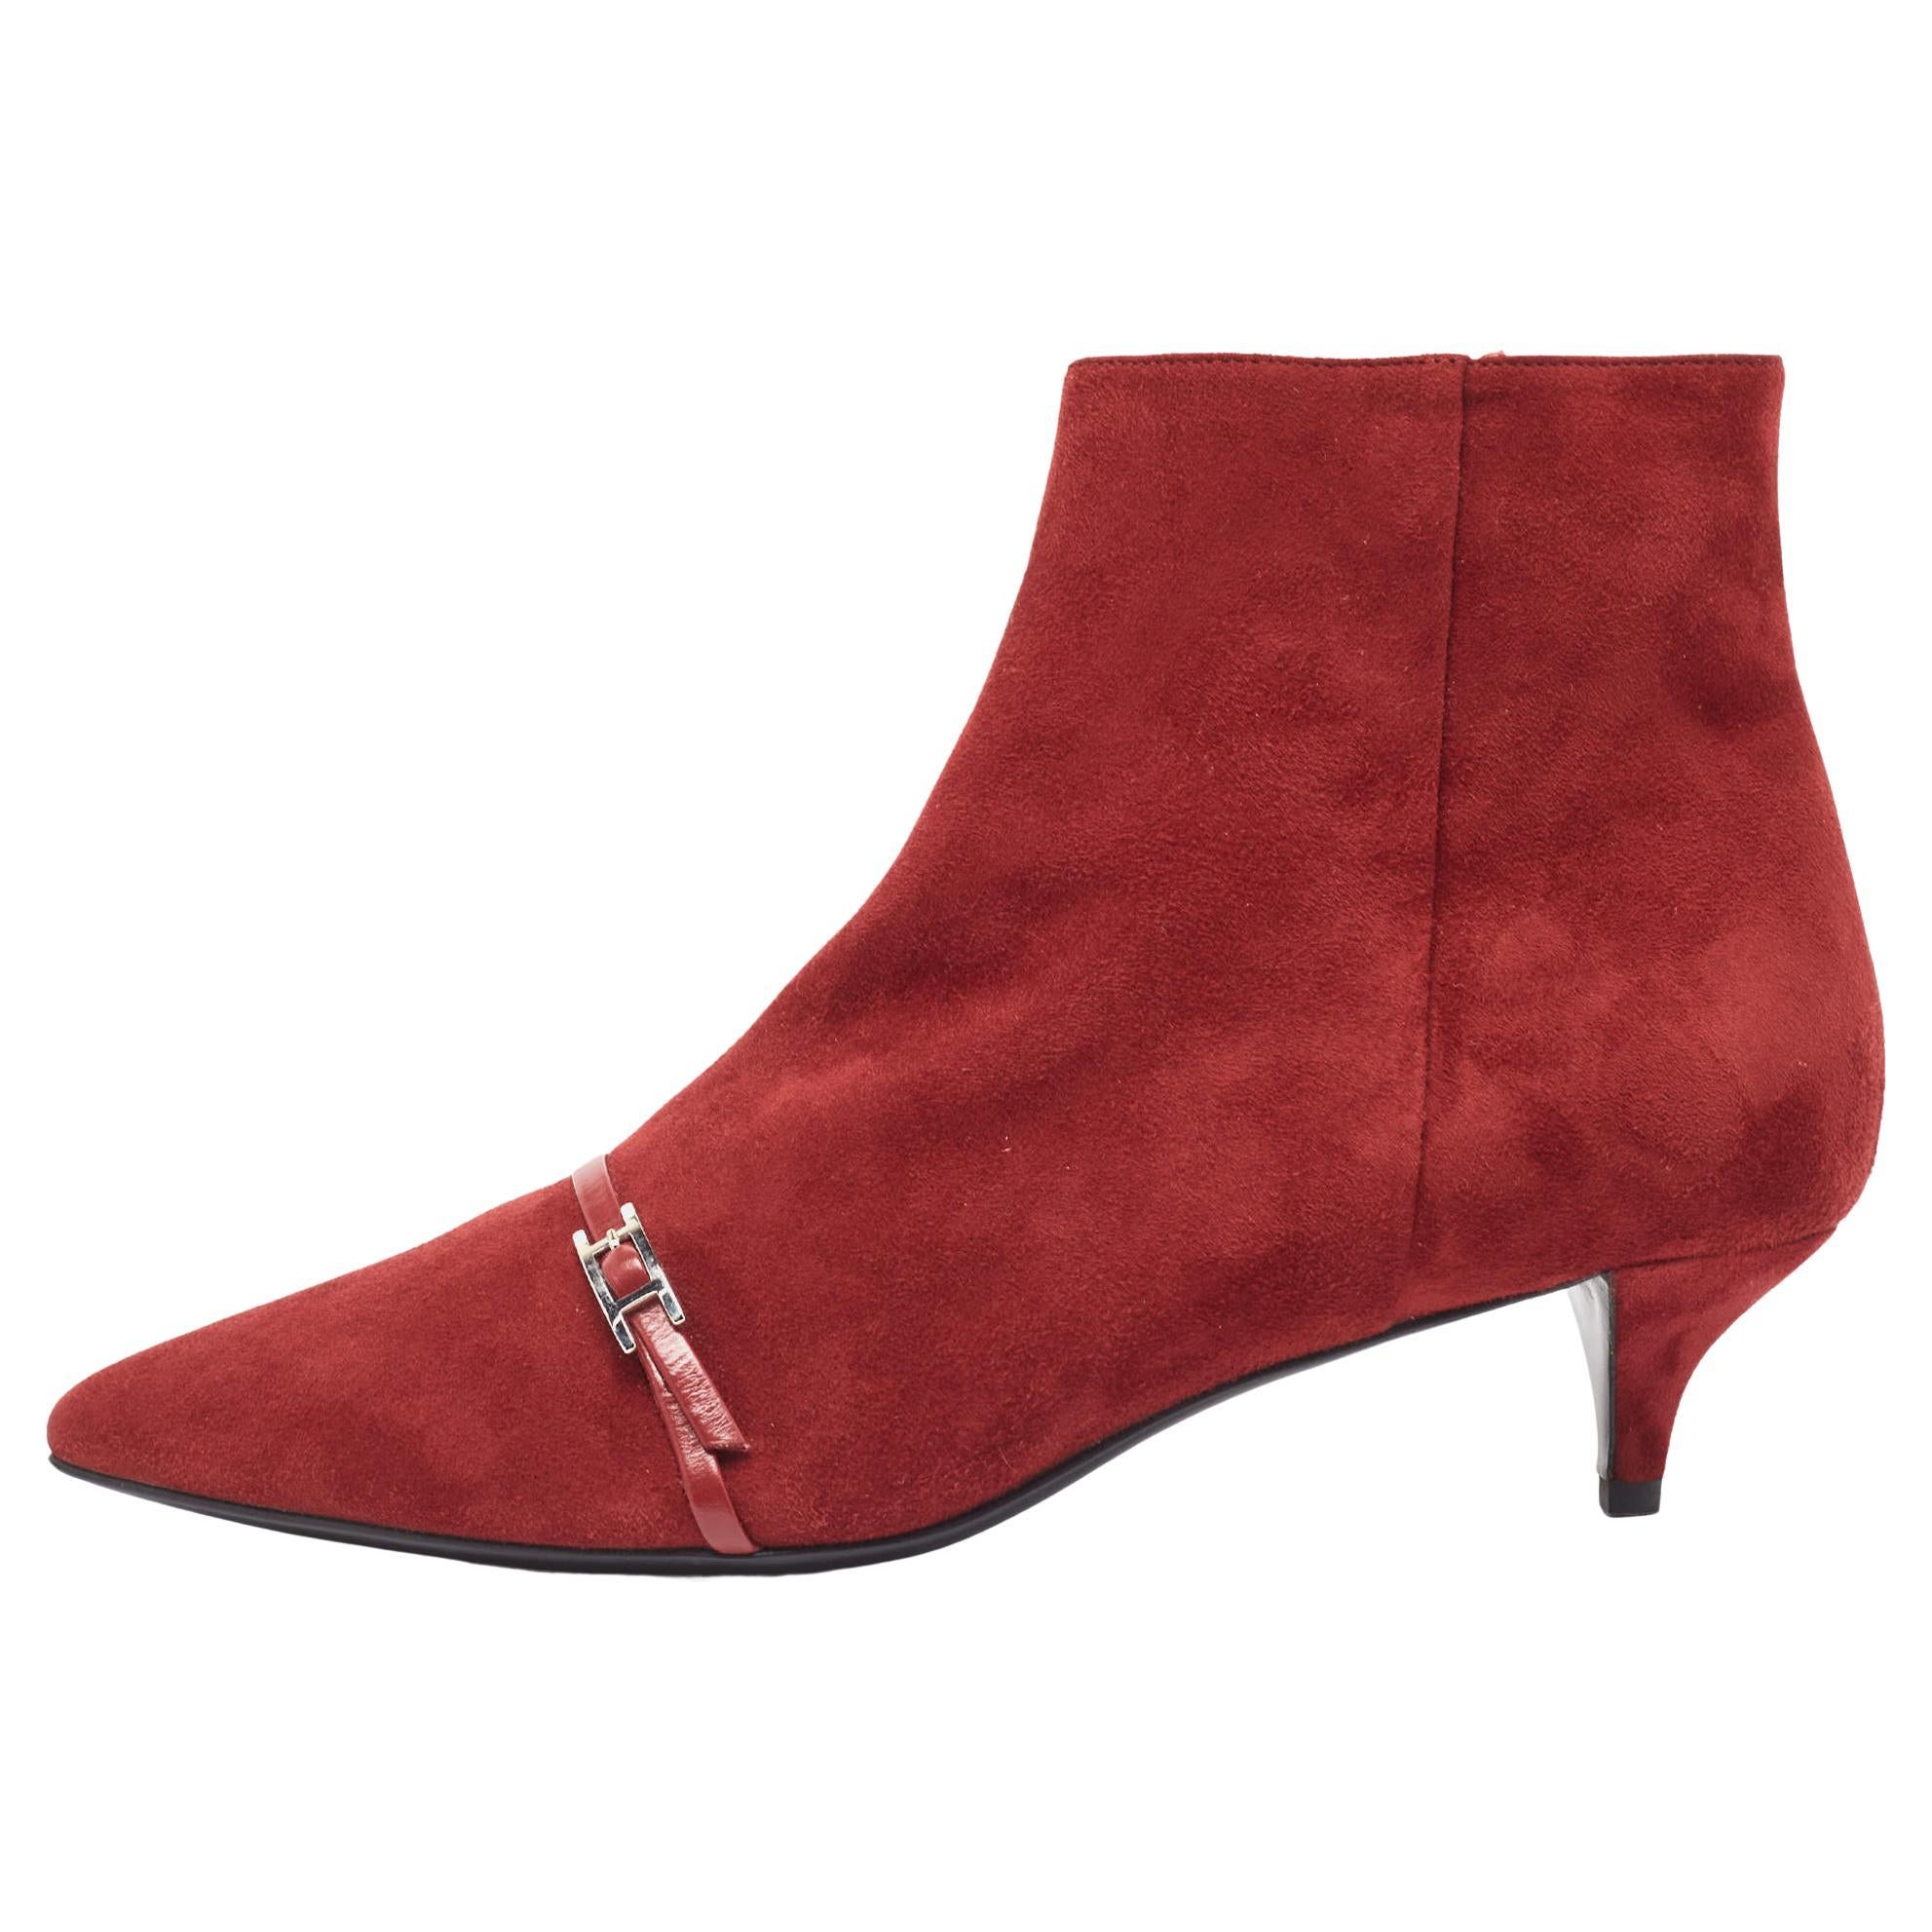 Hermès Dark Red Suede Ankle Booties Size 39 For Sale